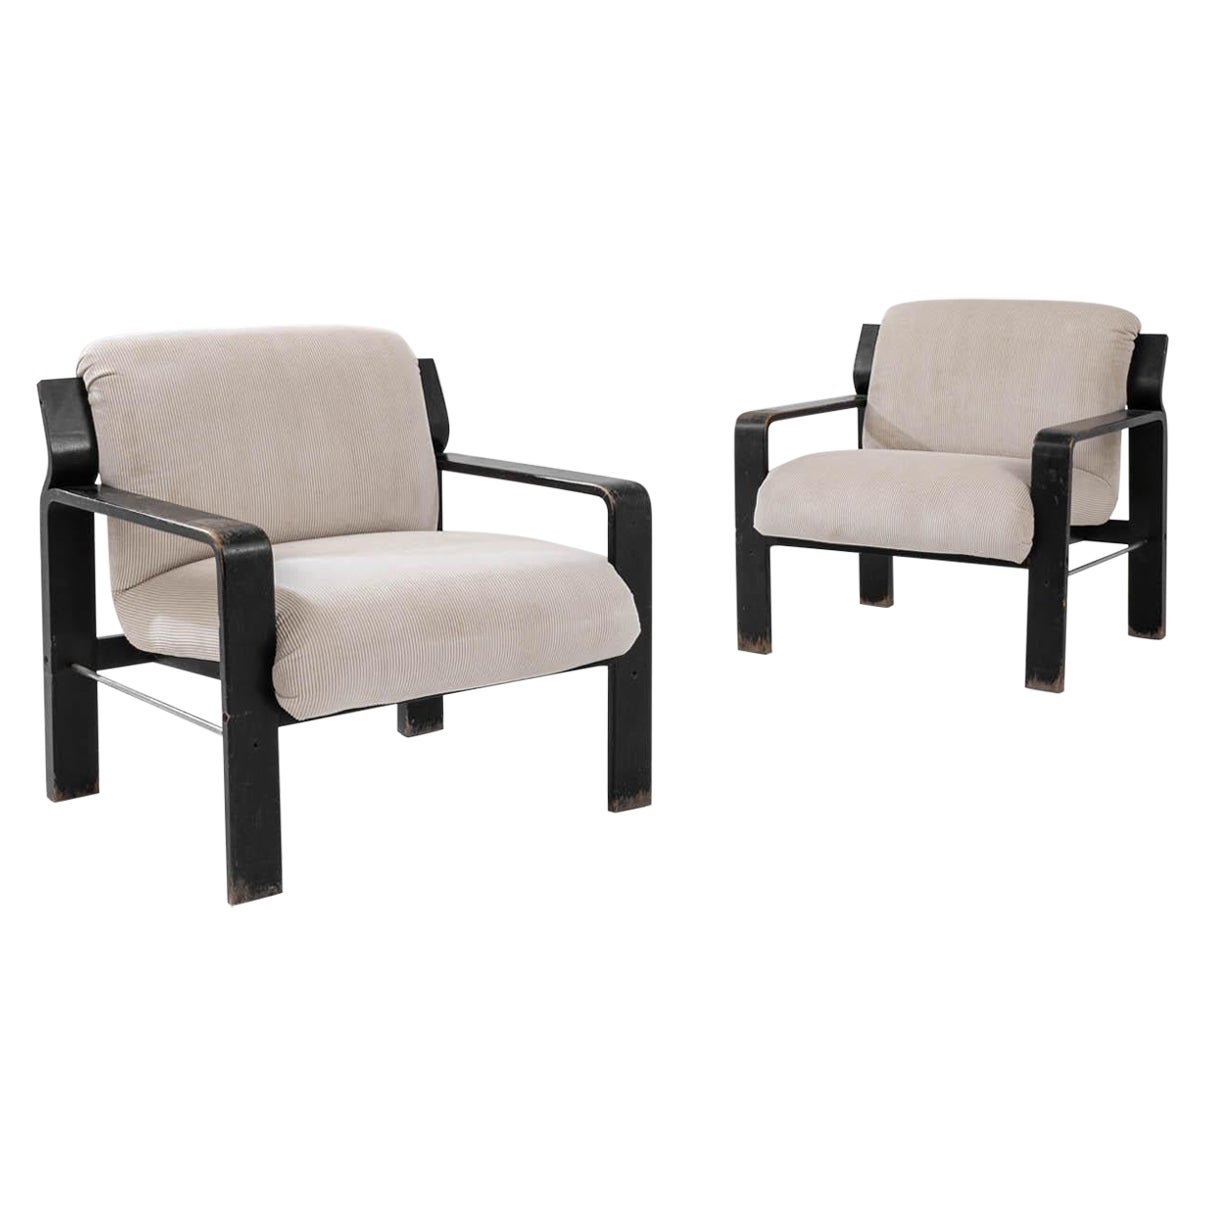 1960s Czech Armchairs by Ludvik Volak, a Pair For Sale